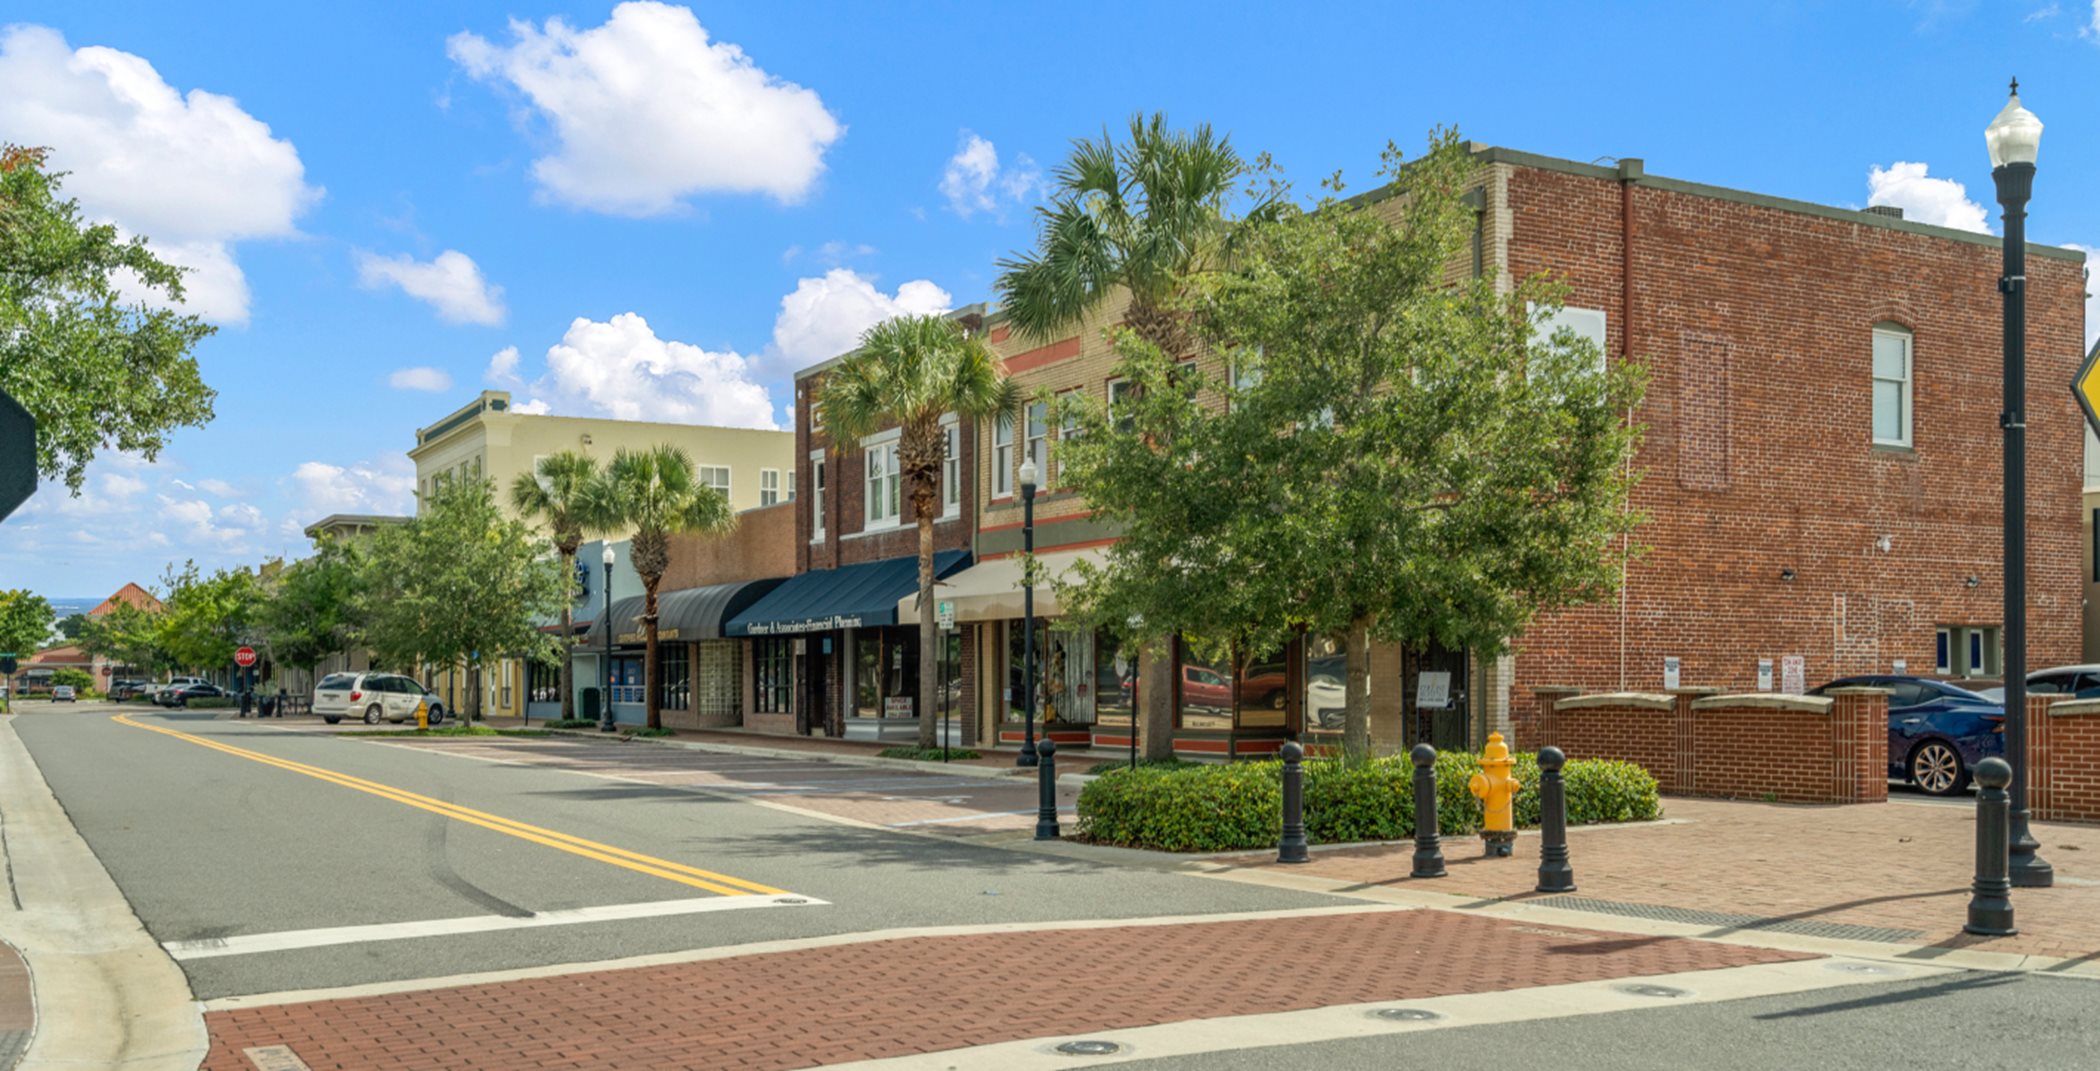 Downtown Winter Haven